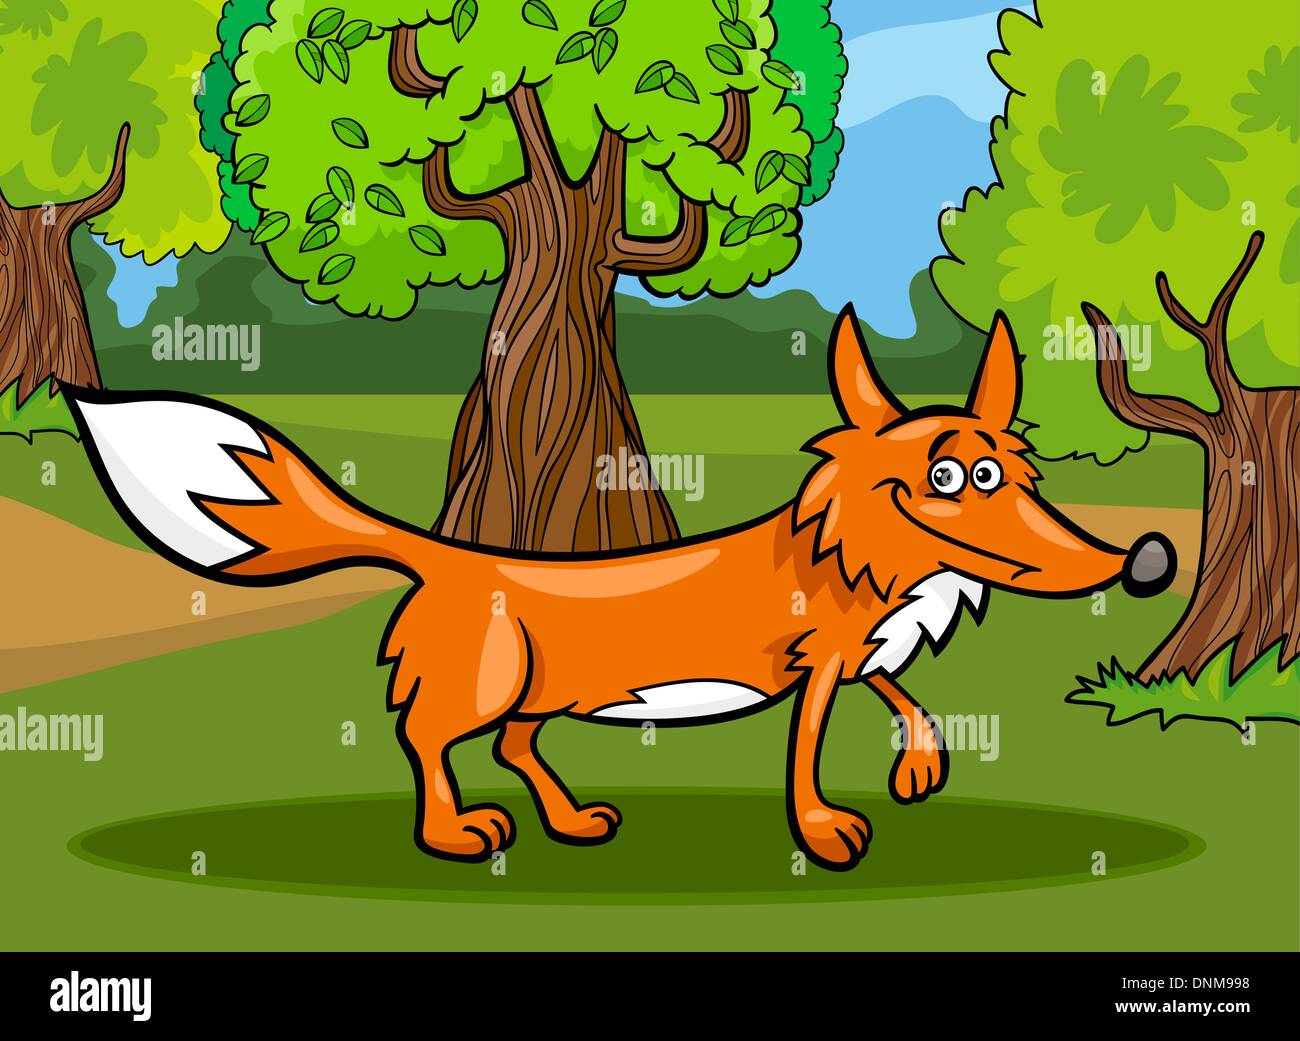 Cartoon Illustration Of Funny Wild Fox Animal In The Forest Stock Vector Image Art Alamy